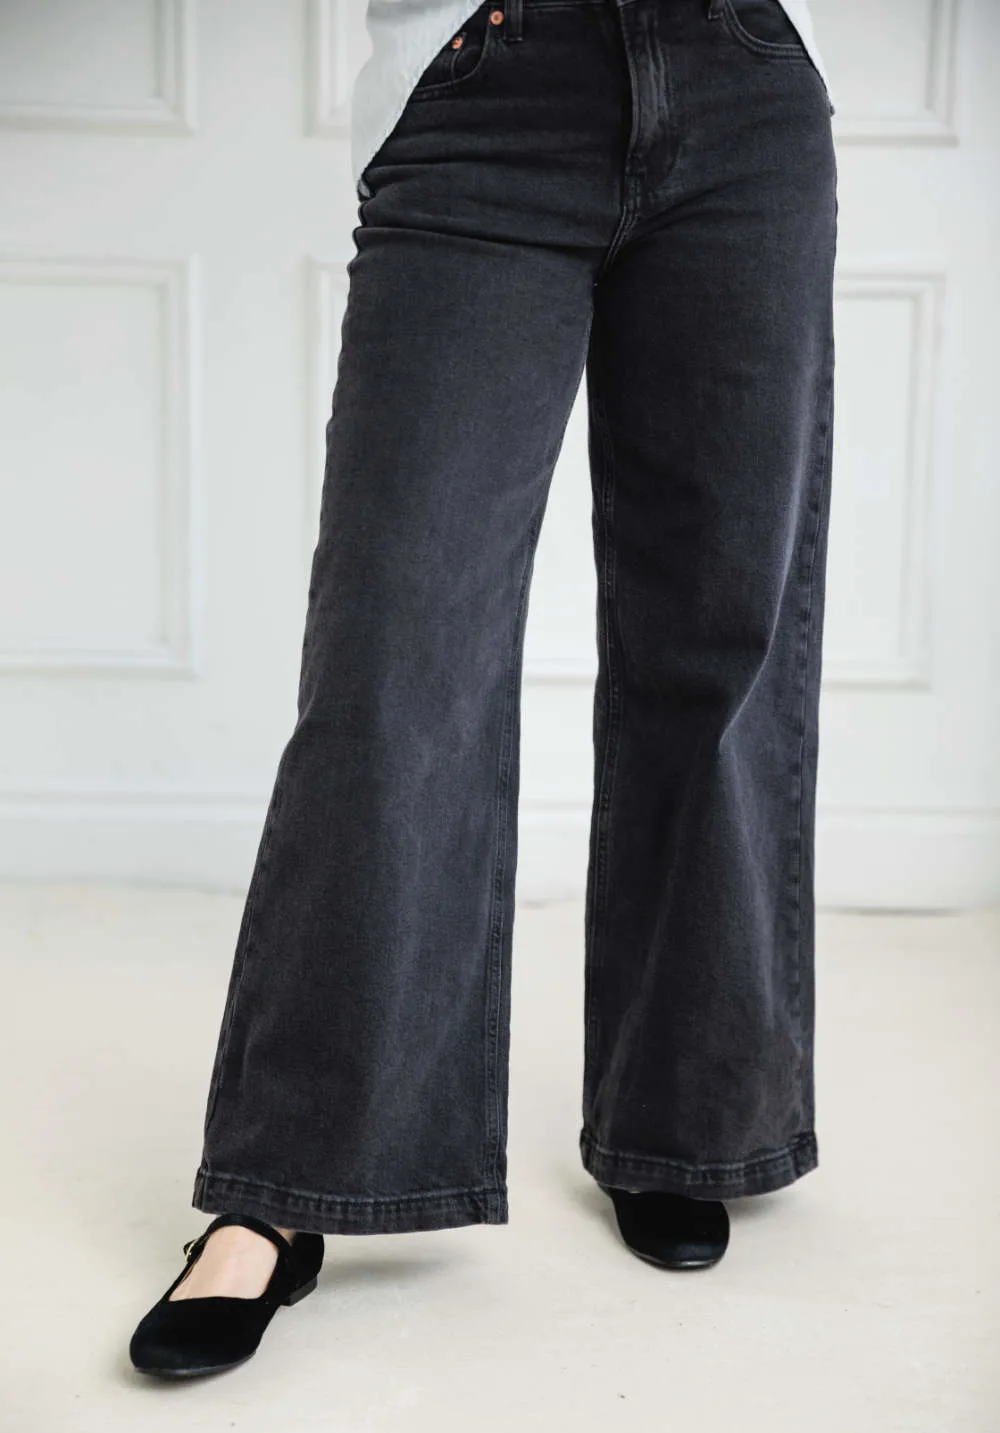 Cropped view of woman wearing full length wide leg jeans with ballerina flats.